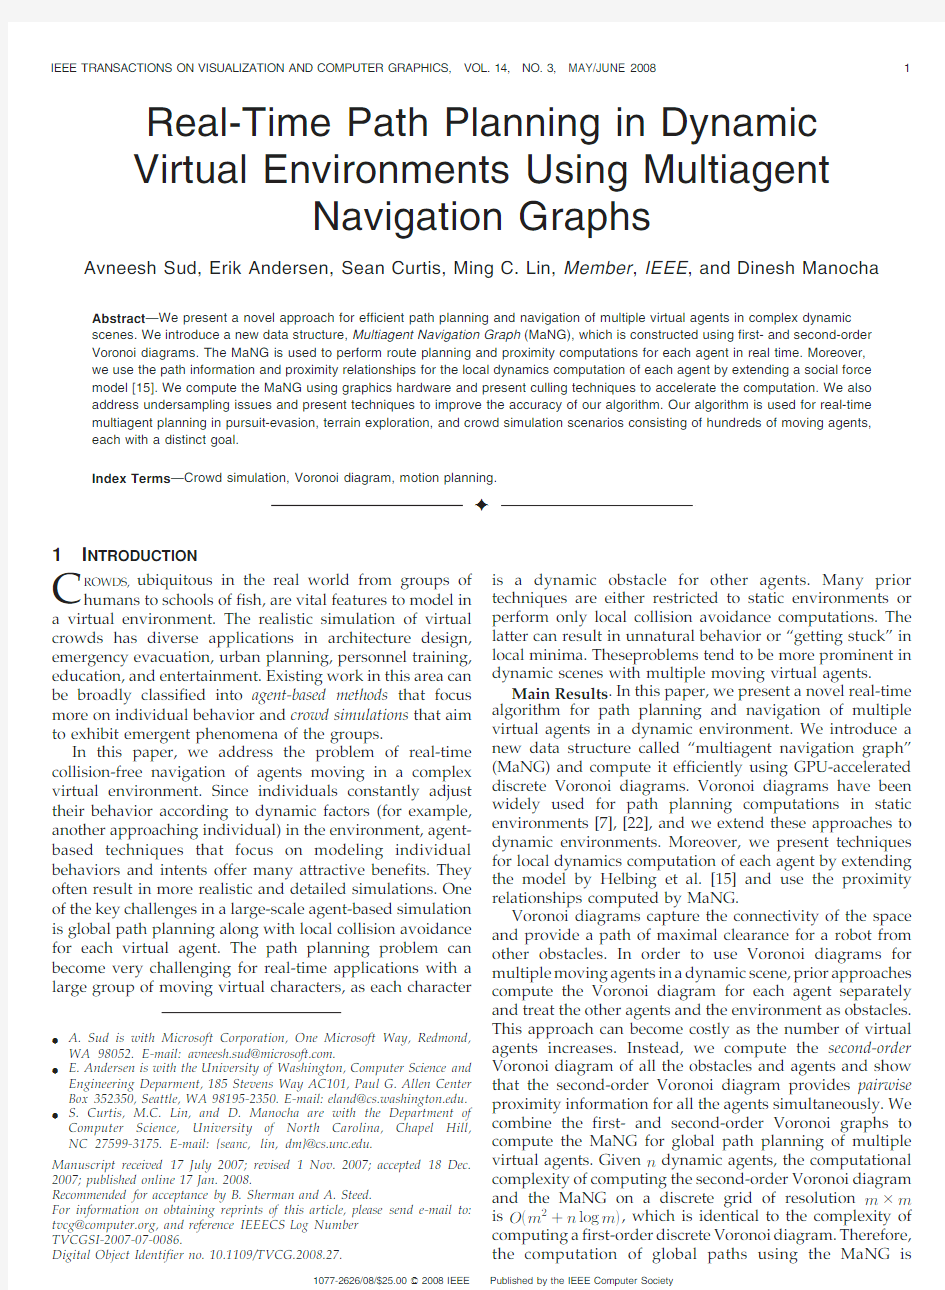 Real-Time Path Planning in Dynamic Virtual Environments Using Multiagent Navigation Graphs